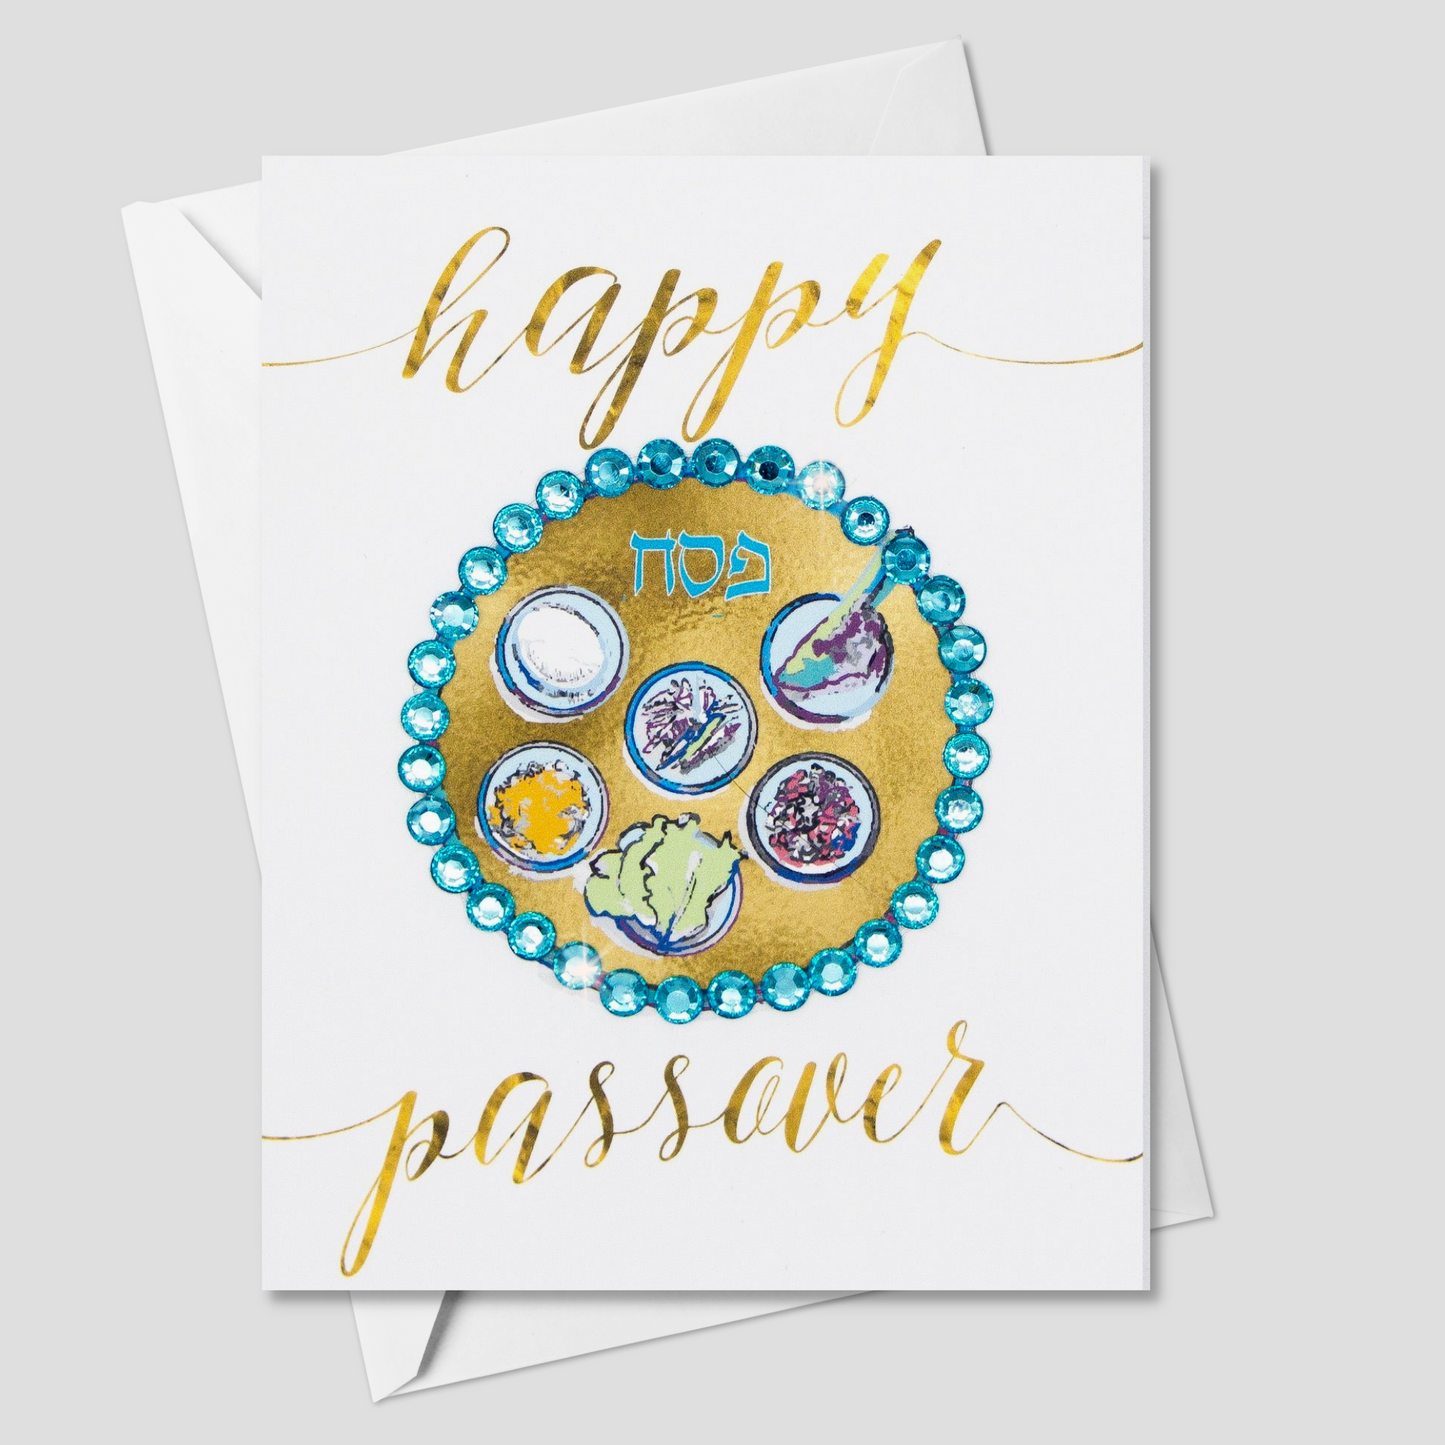 Happy Passover Gold and Blue Sedar Plate Greeting Card